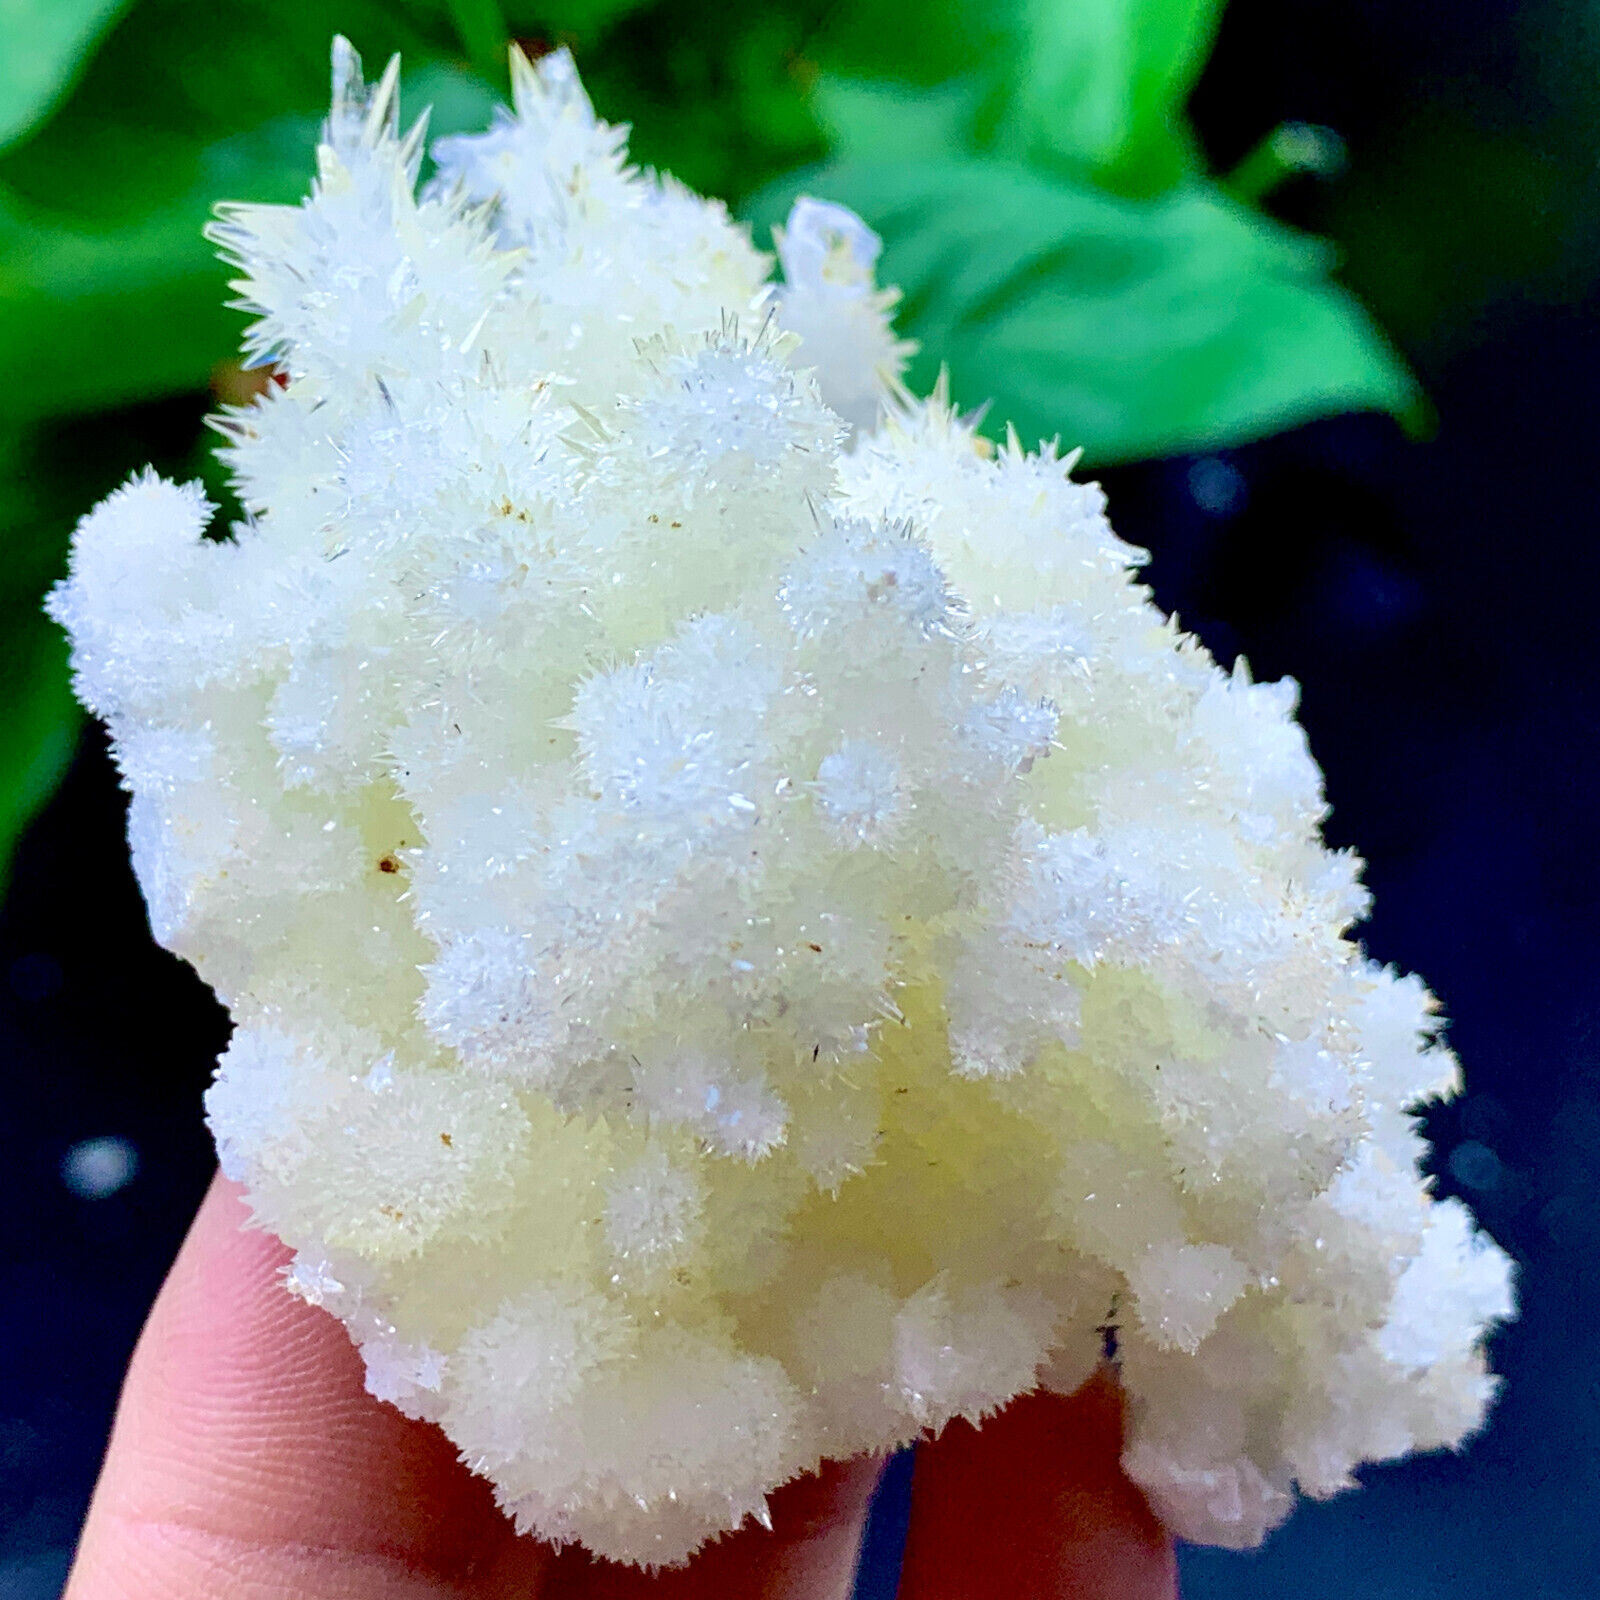 104g Museum Quality White Flowery Hydrozincite Crystal Cluster Mineral Specimen